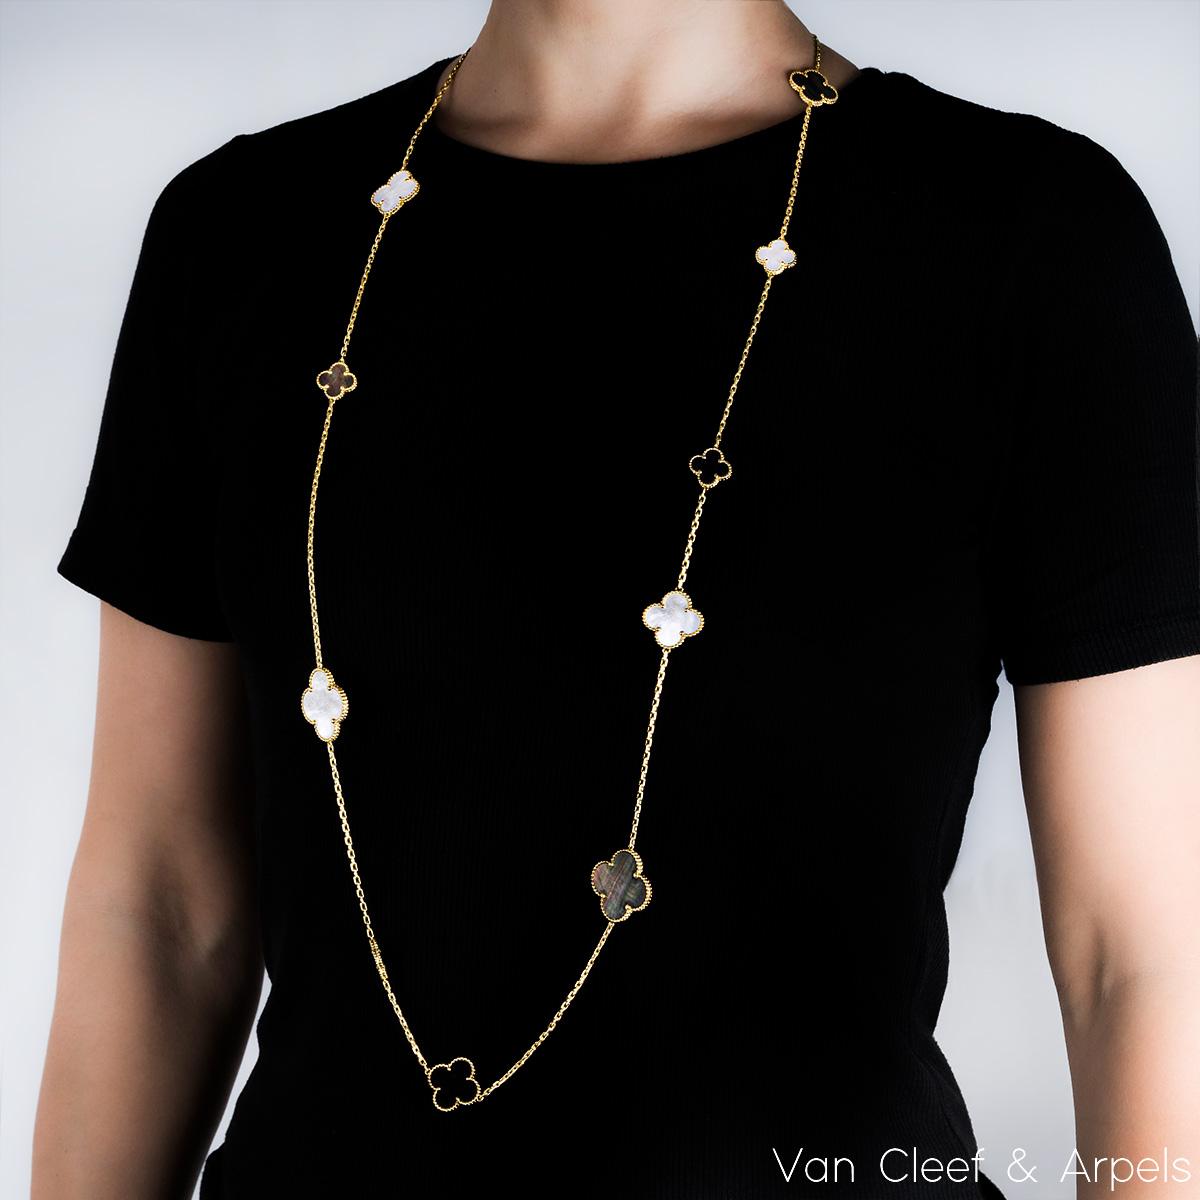 Women's or Men's Van Cleef & Arpels Yellow Gold Mother of Pearl & Onyx Magic Alhambra Necklace